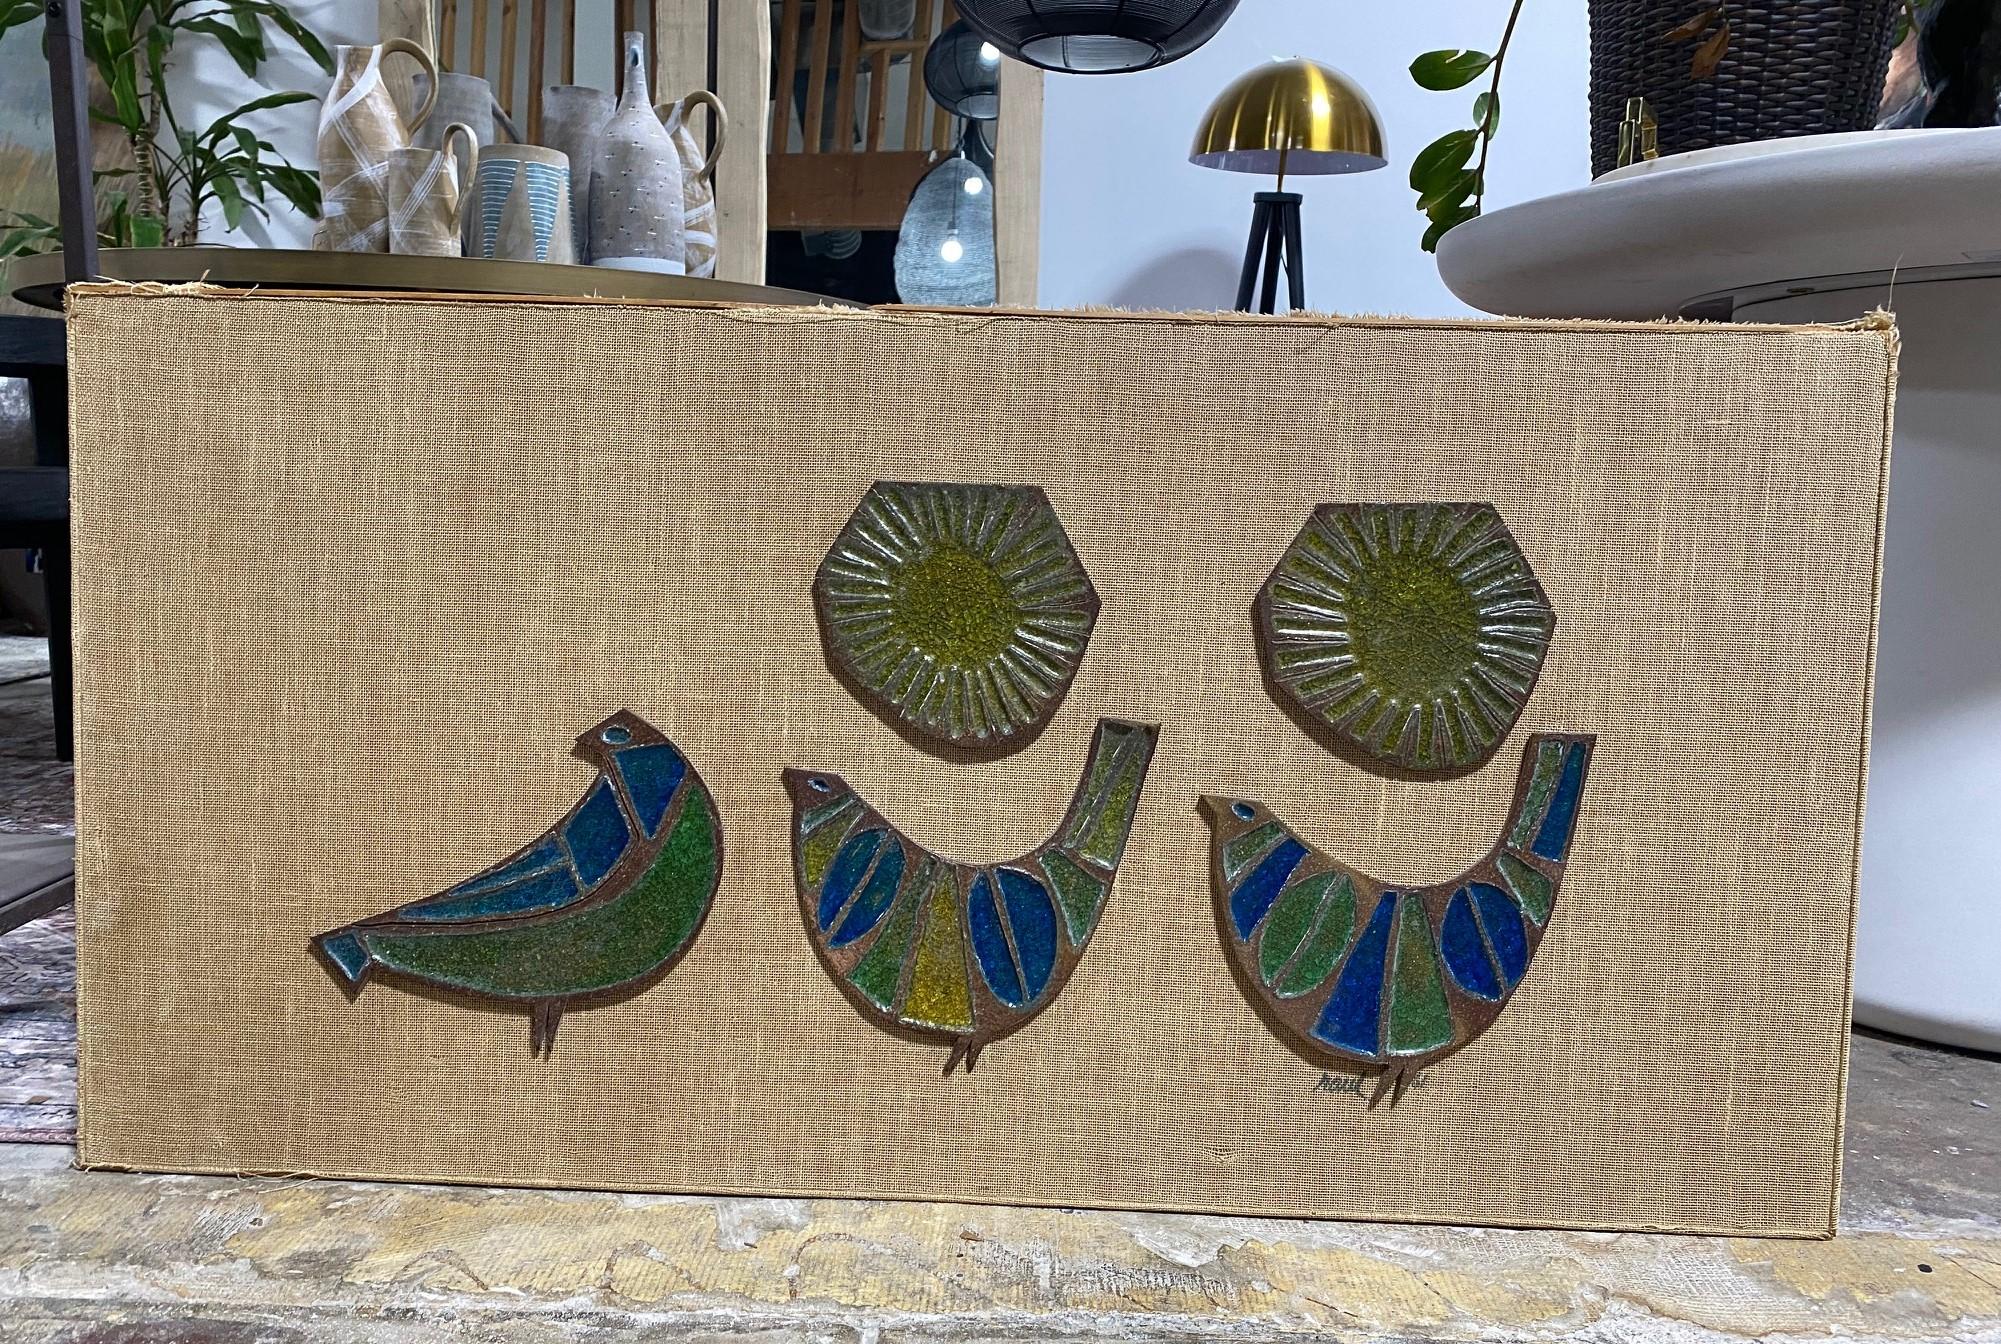 A wonderful, exceptionally large, and rather rare Mid-Century Modern stoneware wall plaque/ sculpture depicting a set of birds - perhaps partridges or doves, by Mexican American ceramic master Raul Coronel who played an important role in the